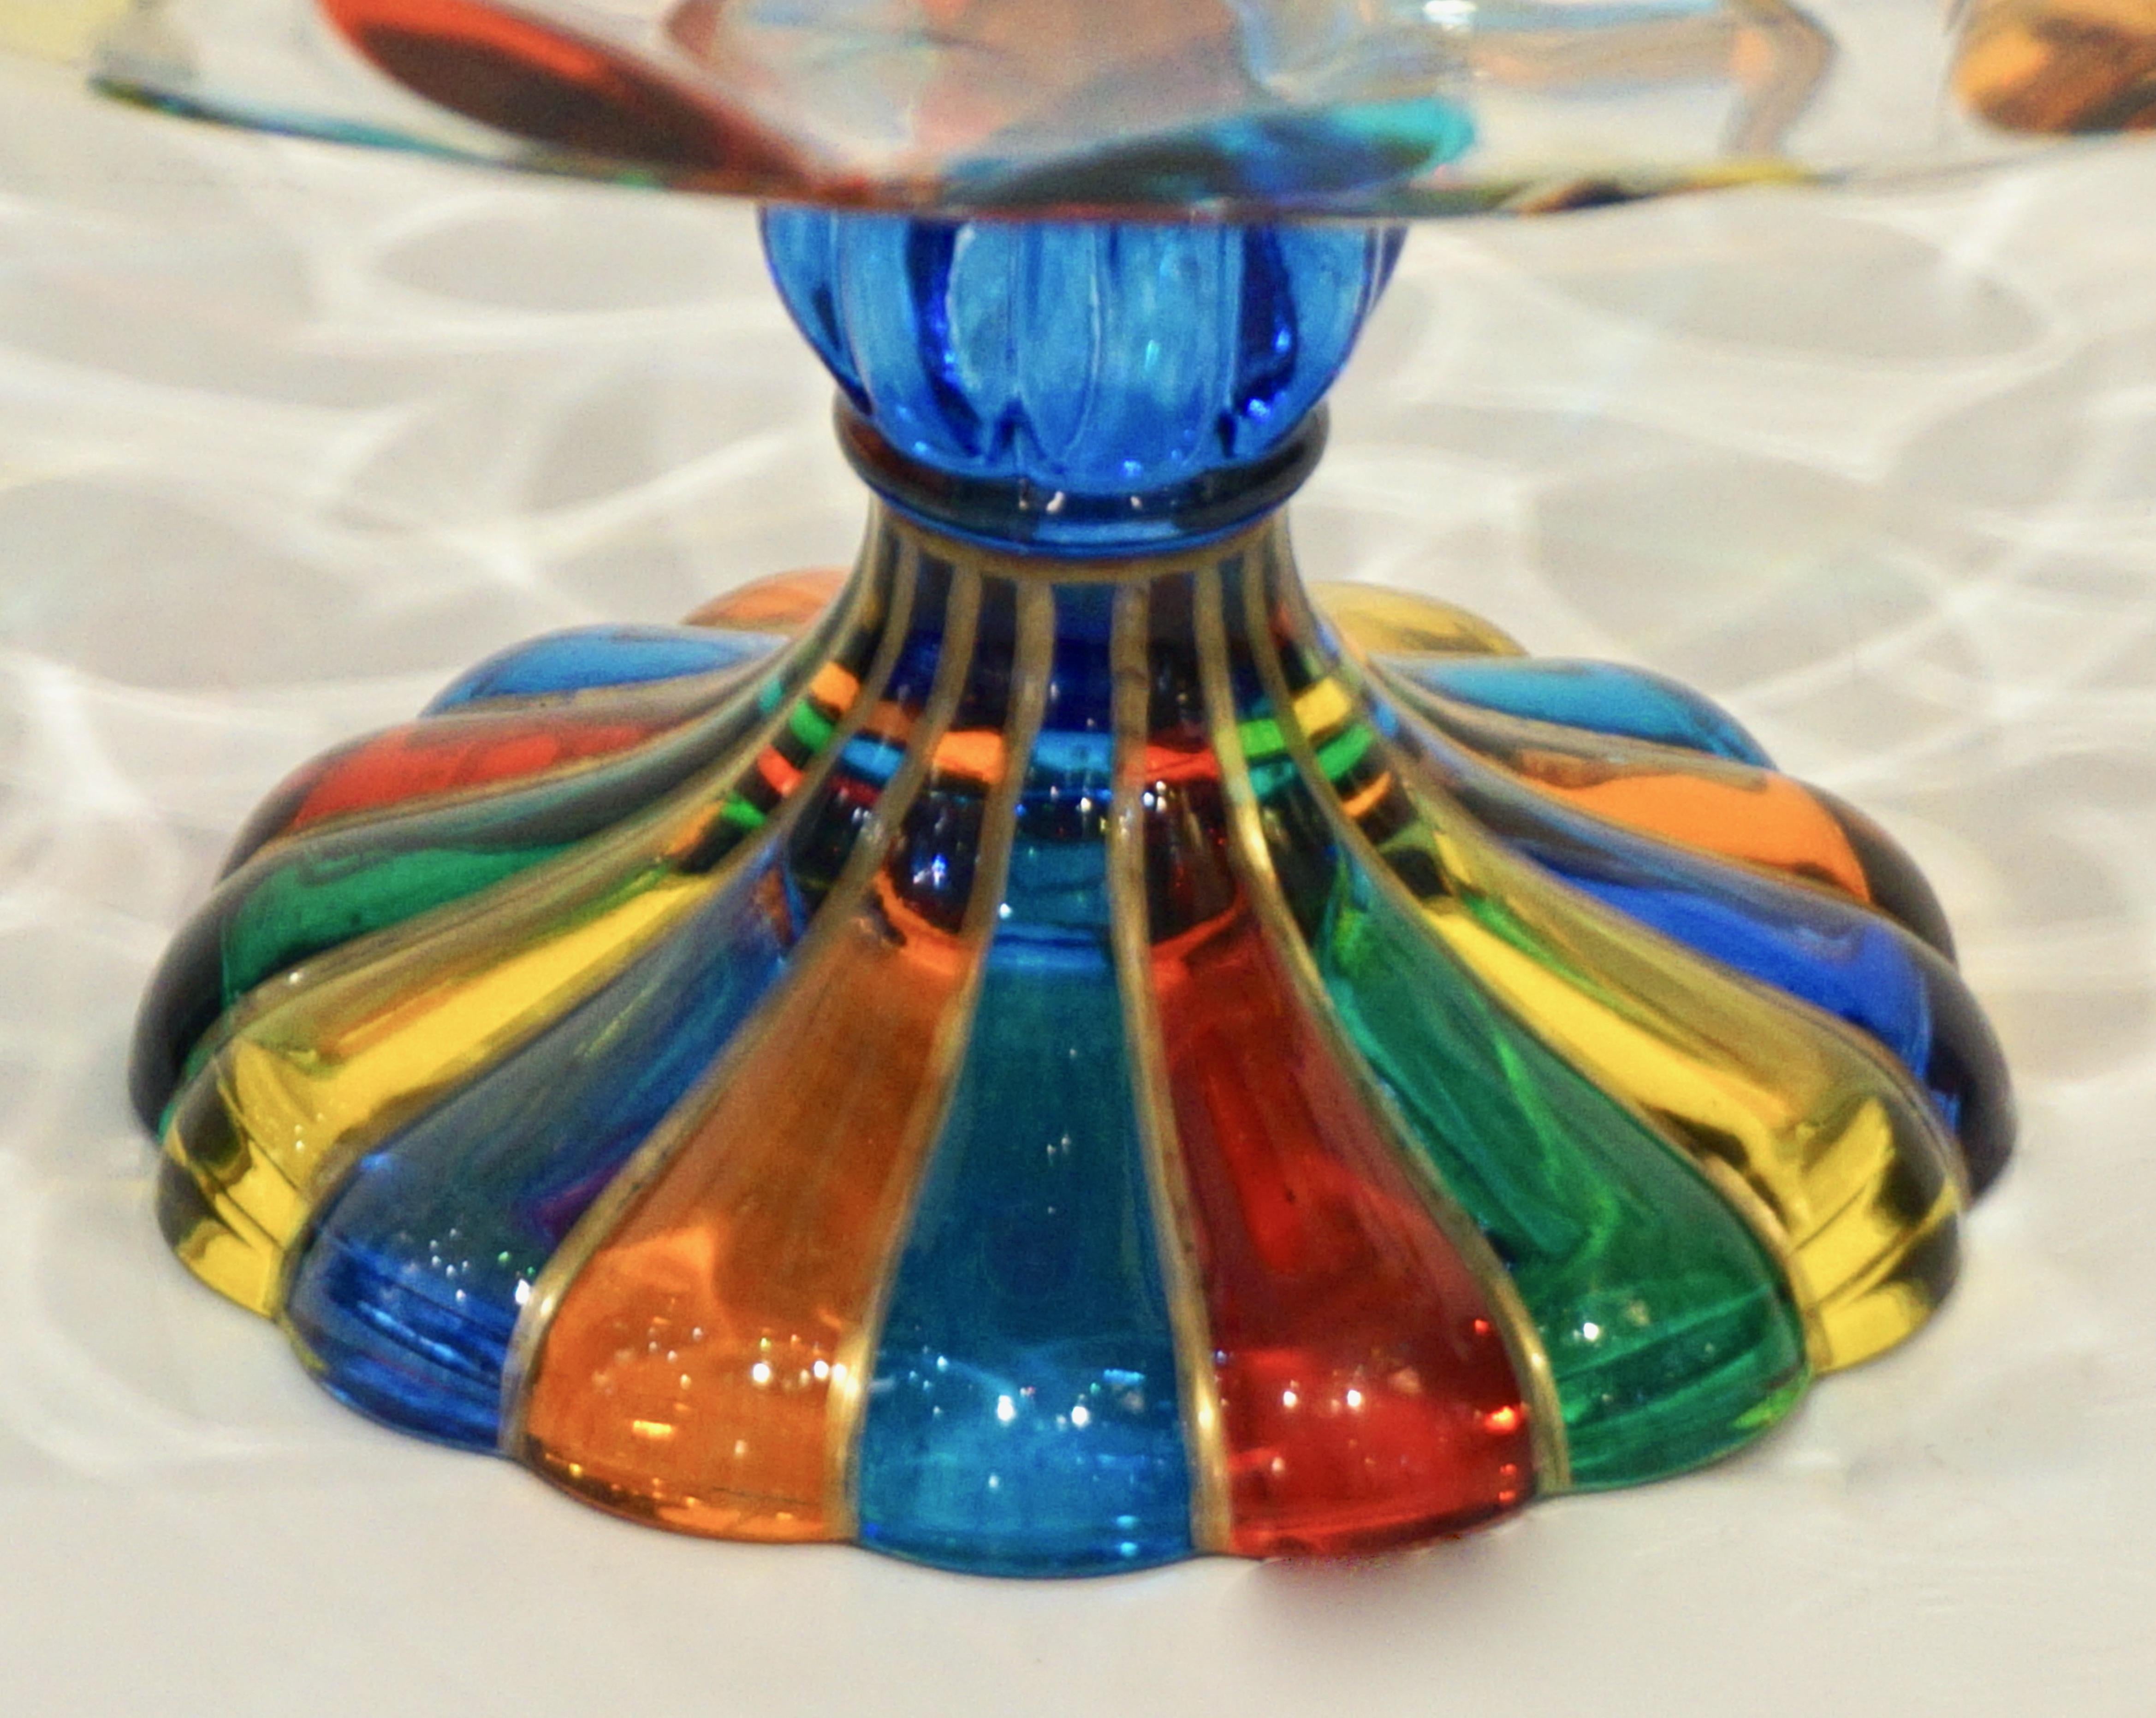 Contemporary Colleoni Modern Crystal Murano Glass Compote Dish / Tazza with Colorful Leaves